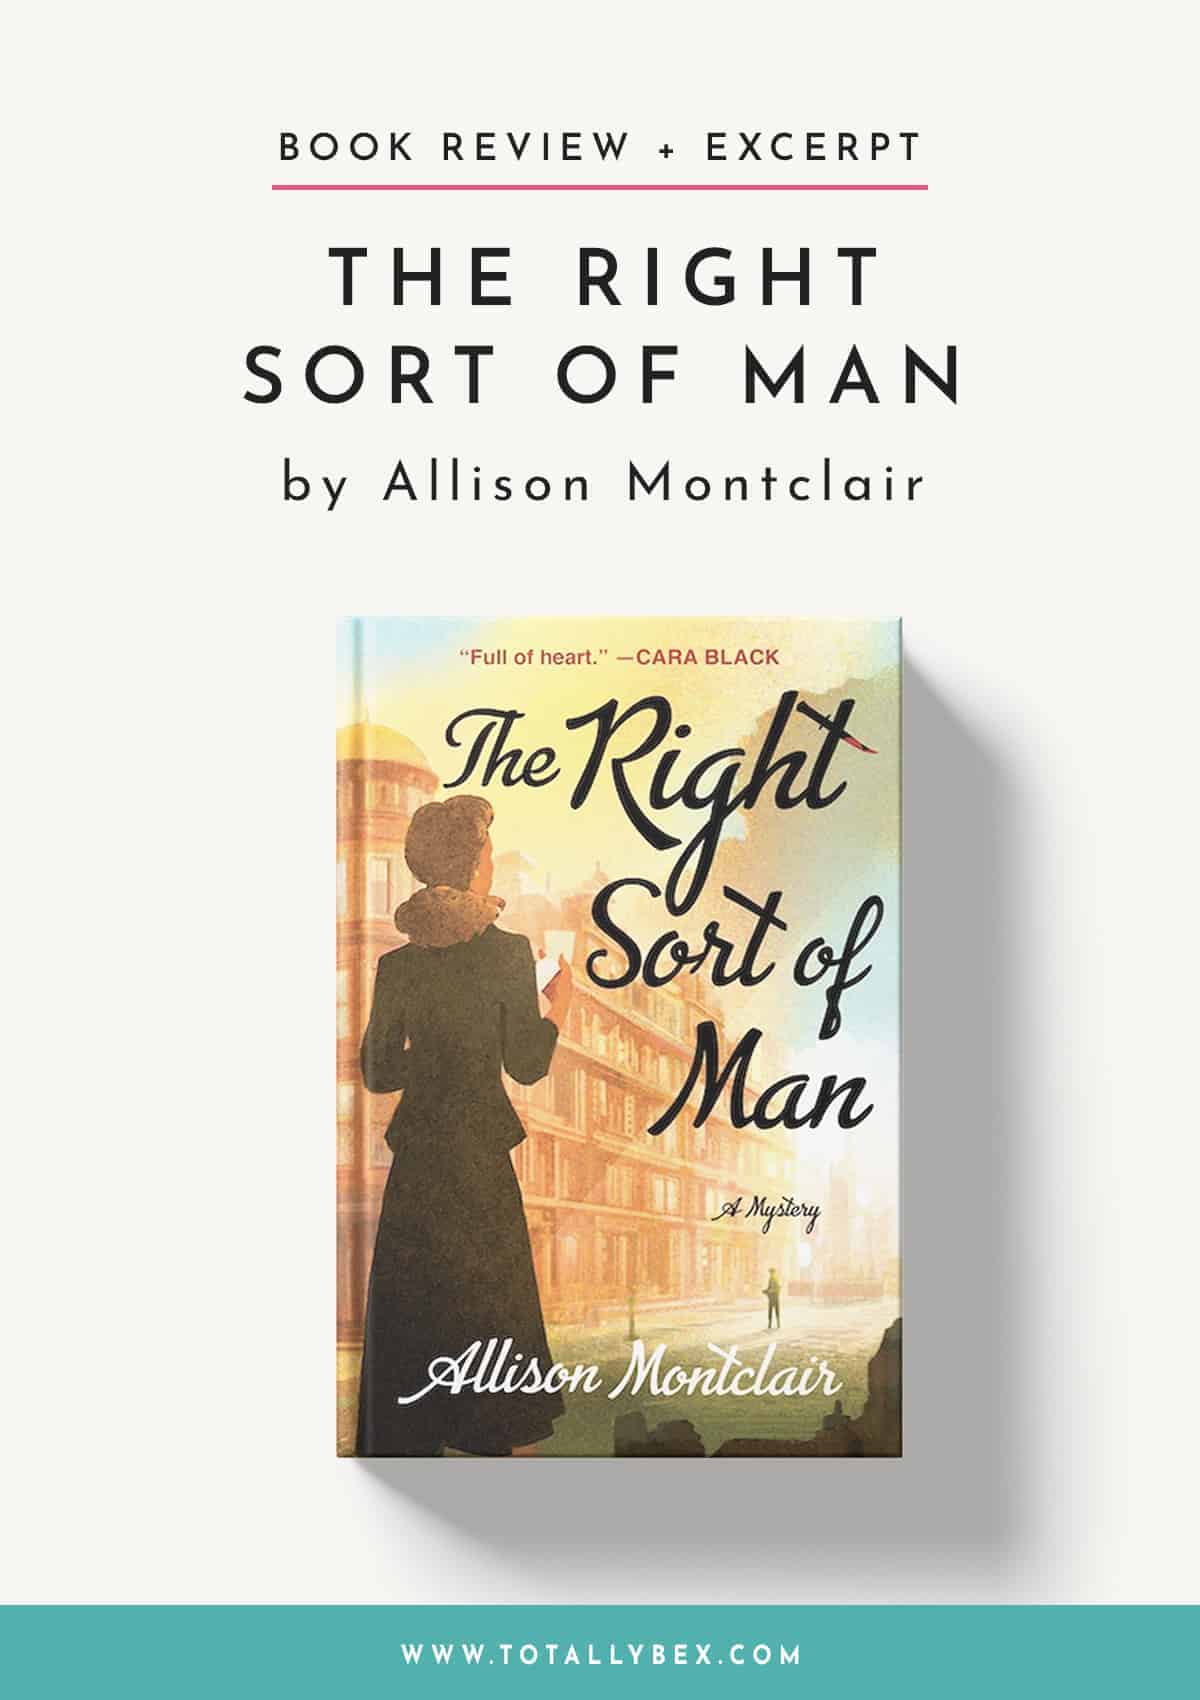 The Right Sort of Man by Allison Montclair-Book Review + Excerpt